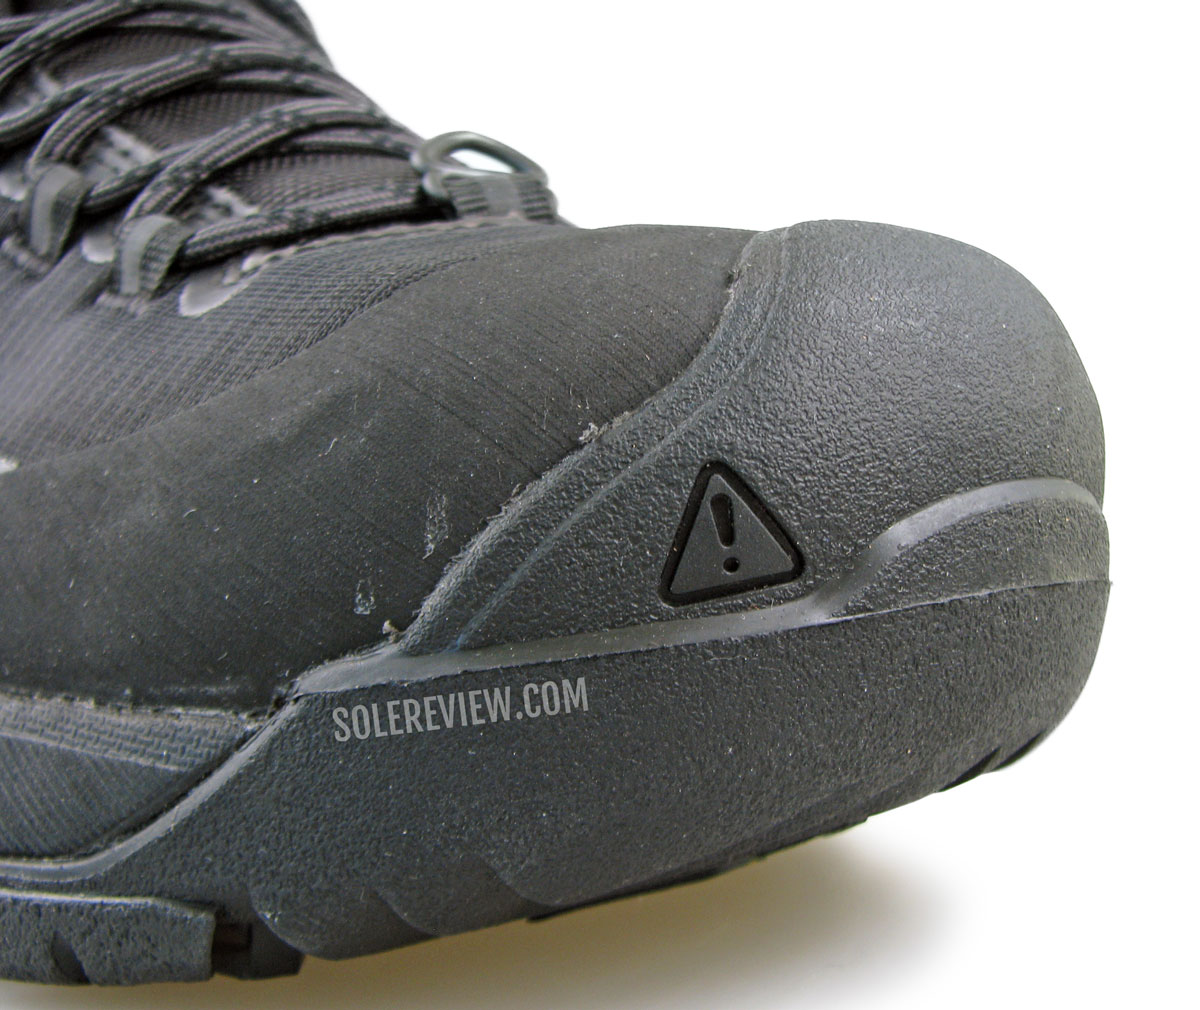 The rubber toe bumper of the Keen Revel IV EXP Polar Mid boot.